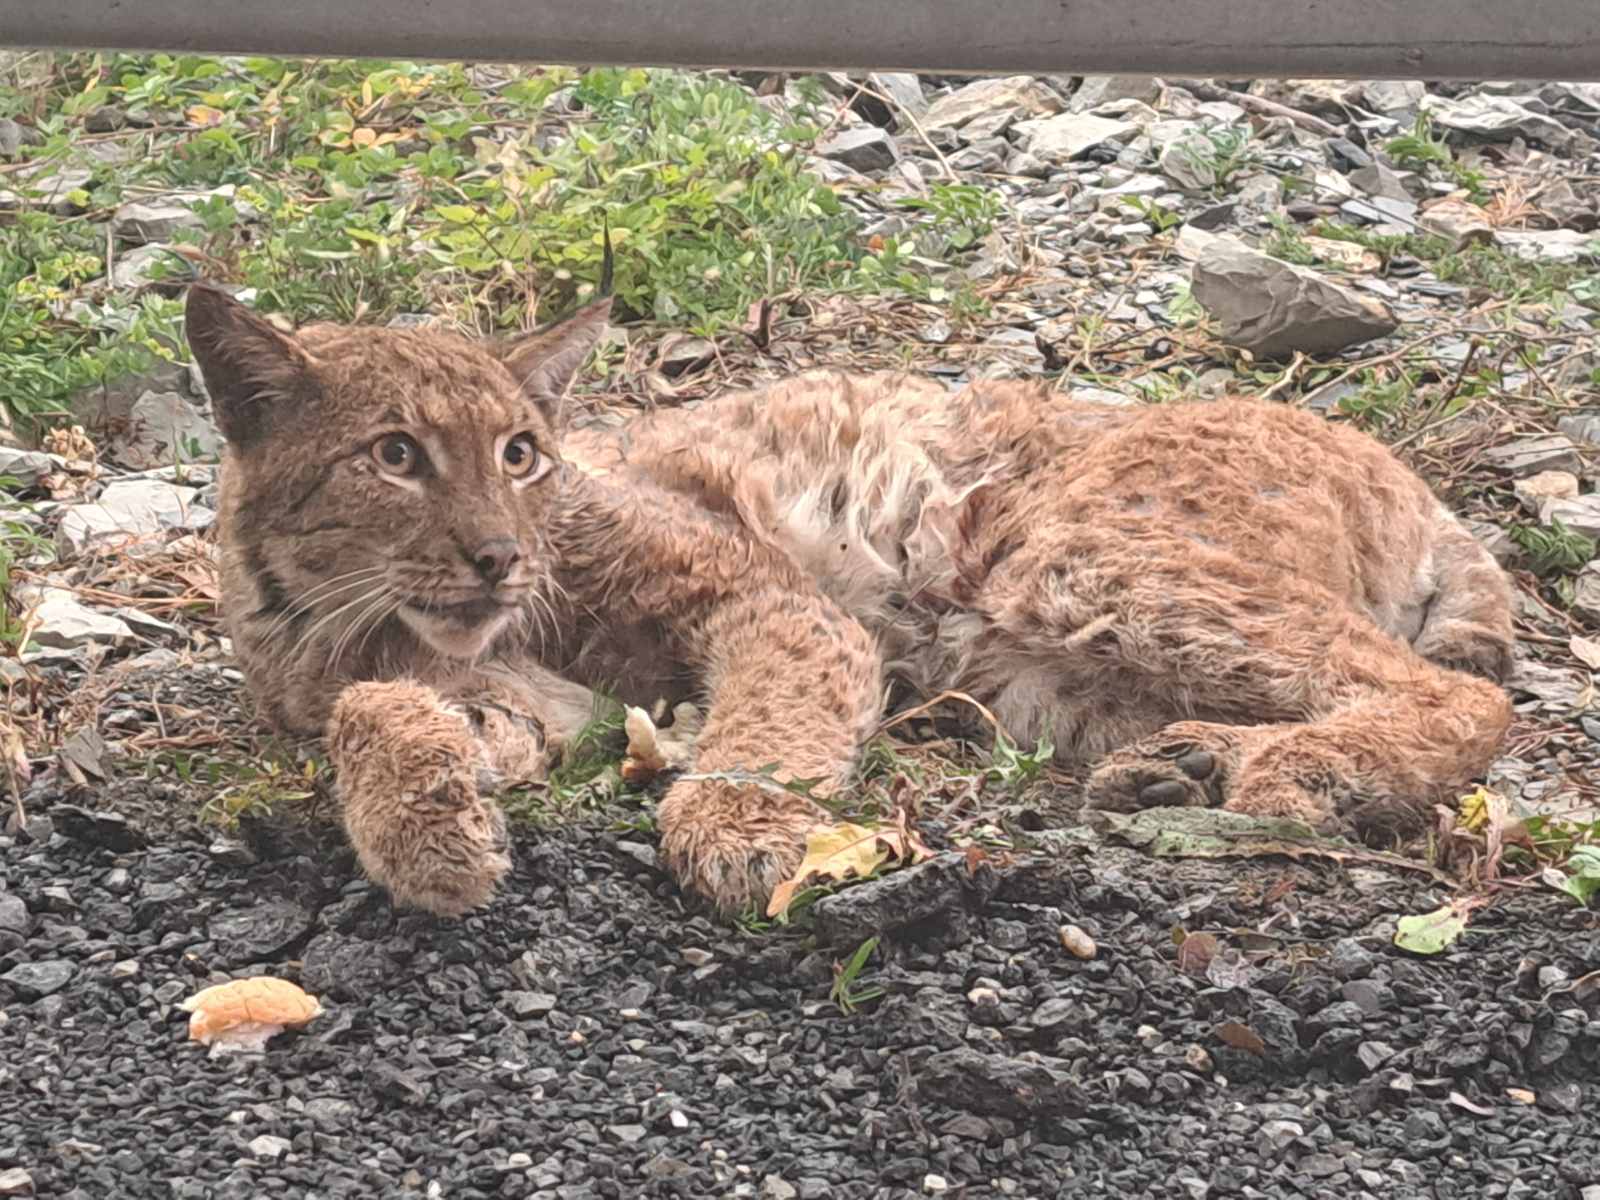 The cured lynx that was injured on Djerdap highway will be taken back to Djerdap National Park on the 3rd of February